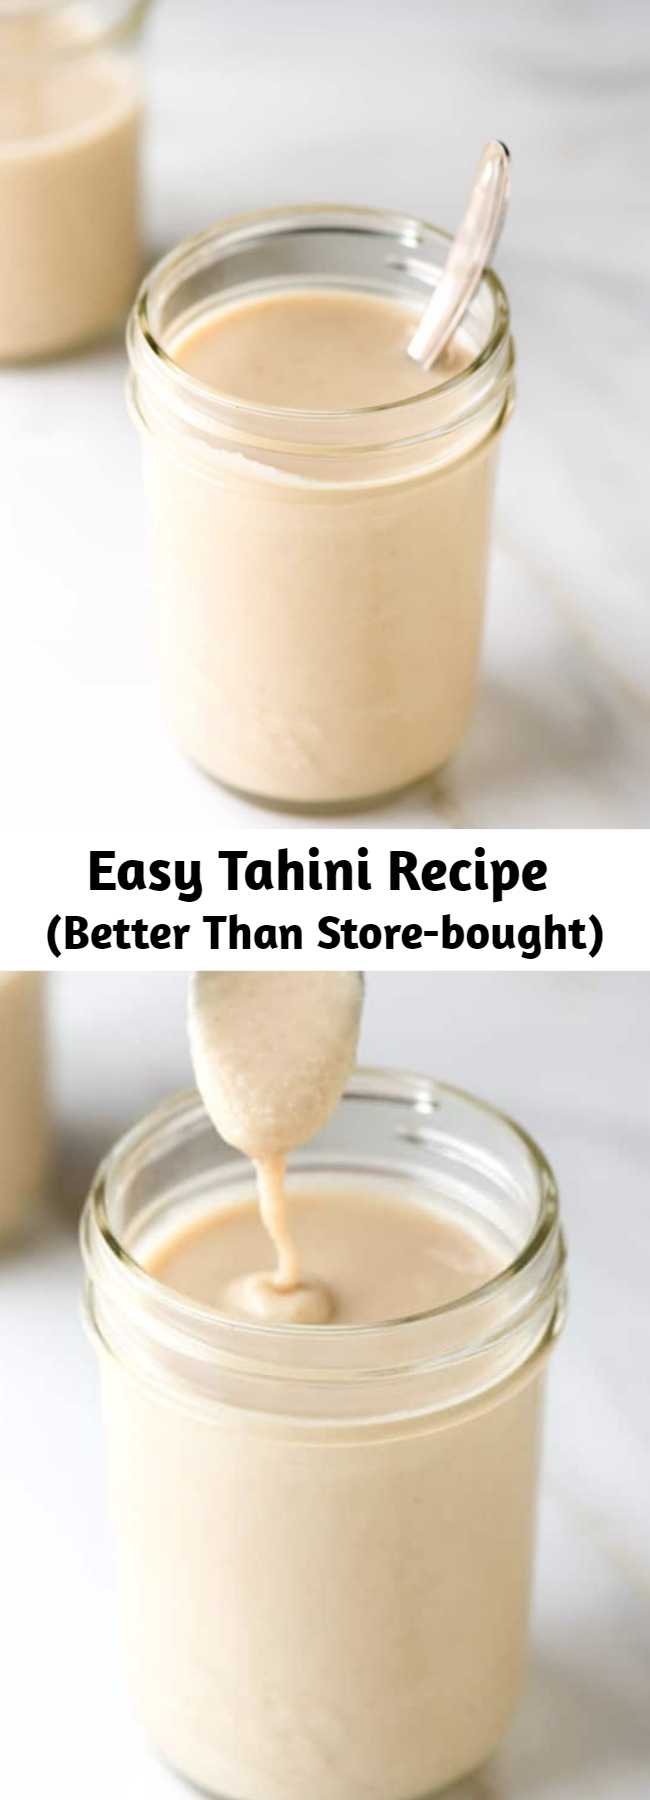 Easy Tahini Recipe (Better Than Store-bought) - Making tahini at home is easy and much less expensive than buying from the store. While tahini can be made from unhulled, sprouted and hulled sesame seeds, we prefer to use hulled sesame seeds for tahini. Tahini can be kept in the refrigerator for a month.